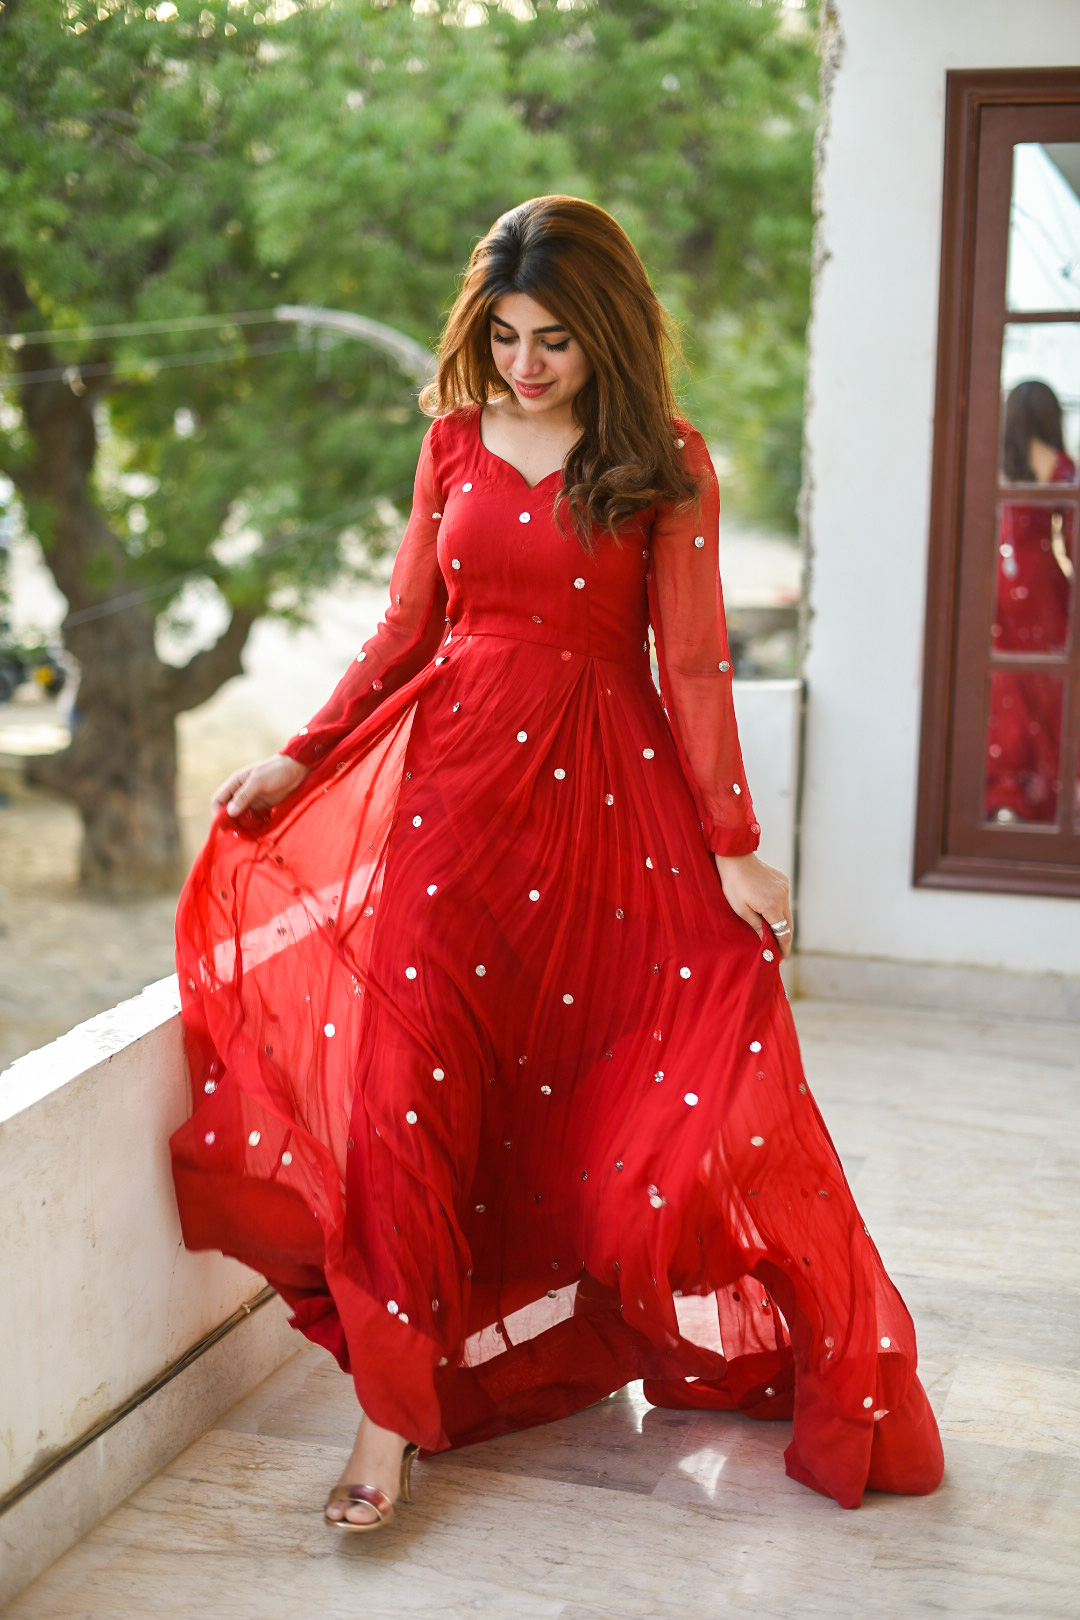 Buy Red Colour Semi-Stitched Anarkali Suit- Jointlook.com/shop